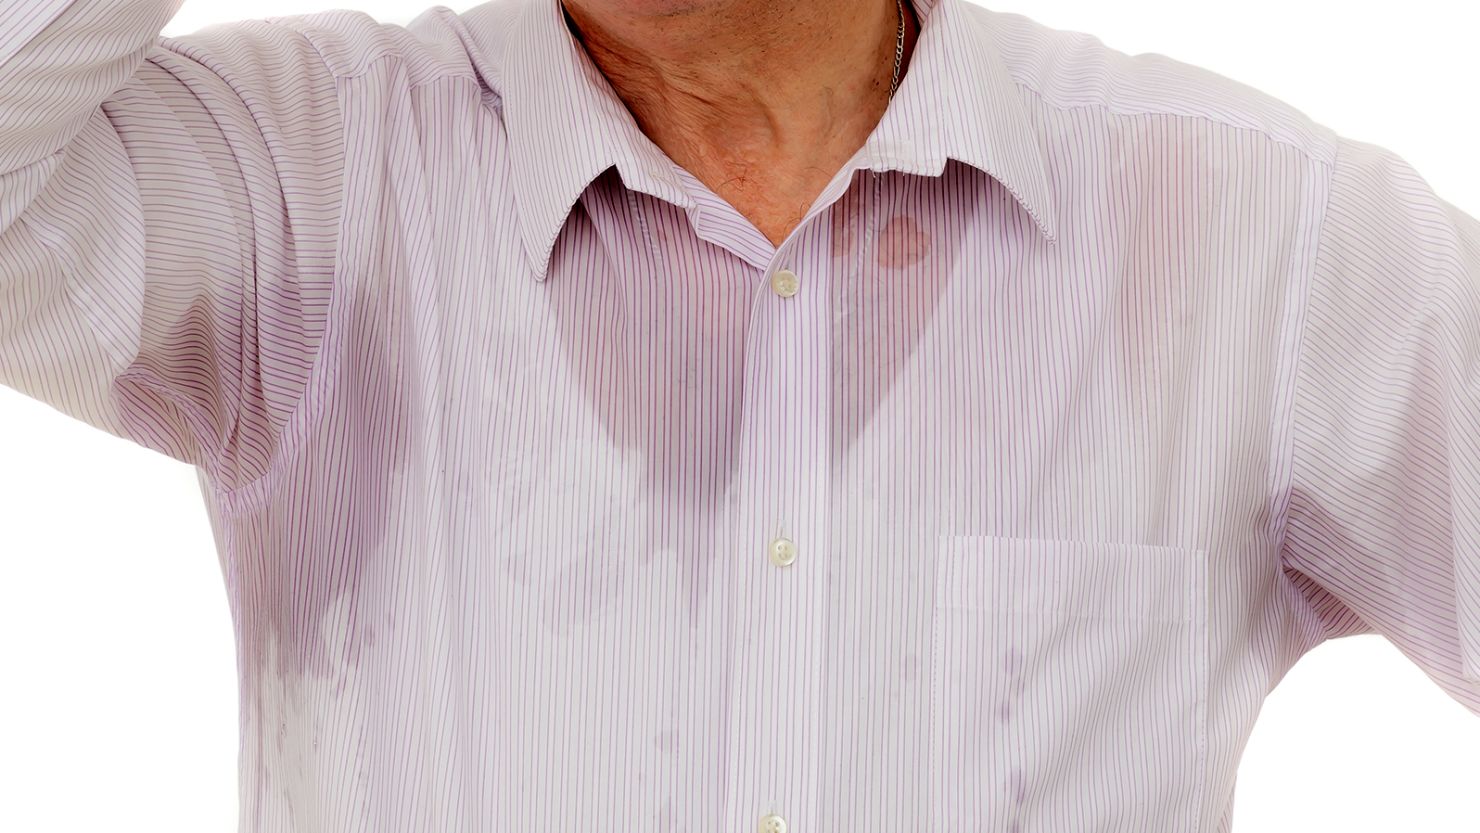 A case reports described a man who struggled with unexplained sweating episodes for years.